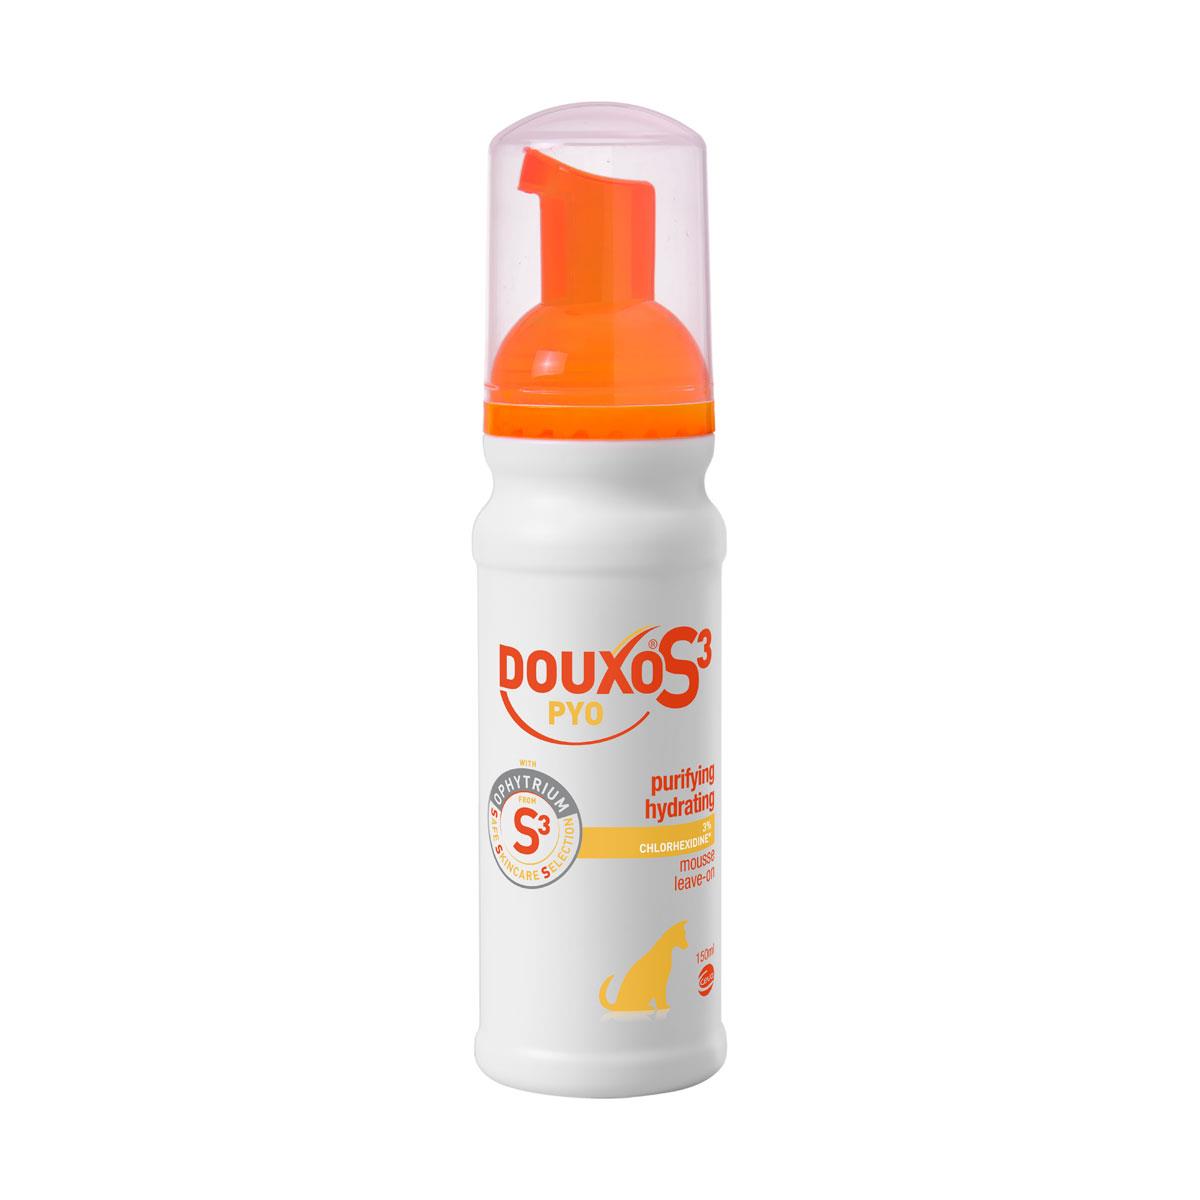 Douxo S3 Pyo Mousse - Just Horse Riders